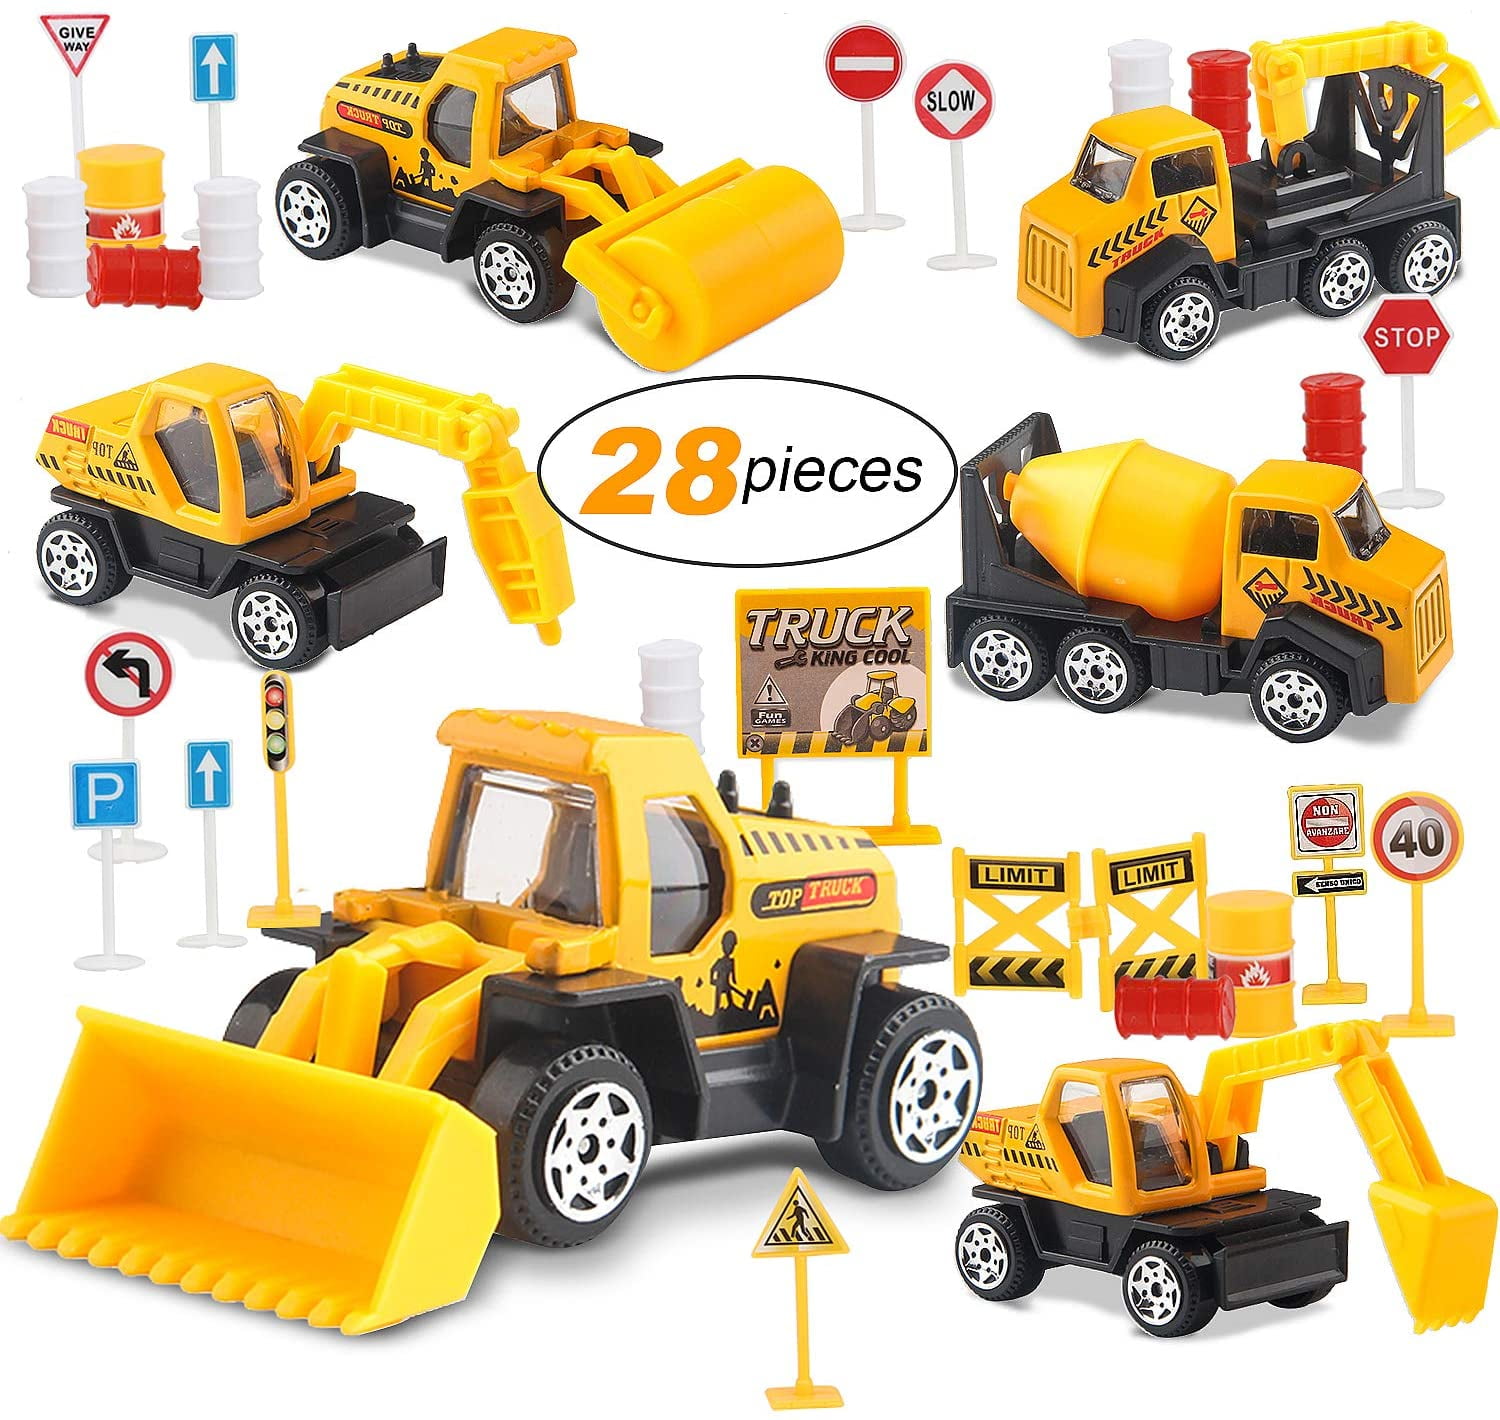 Small Model Pull back Cars Dumper Truck Toy for Boy Construction Vehicles Mini 